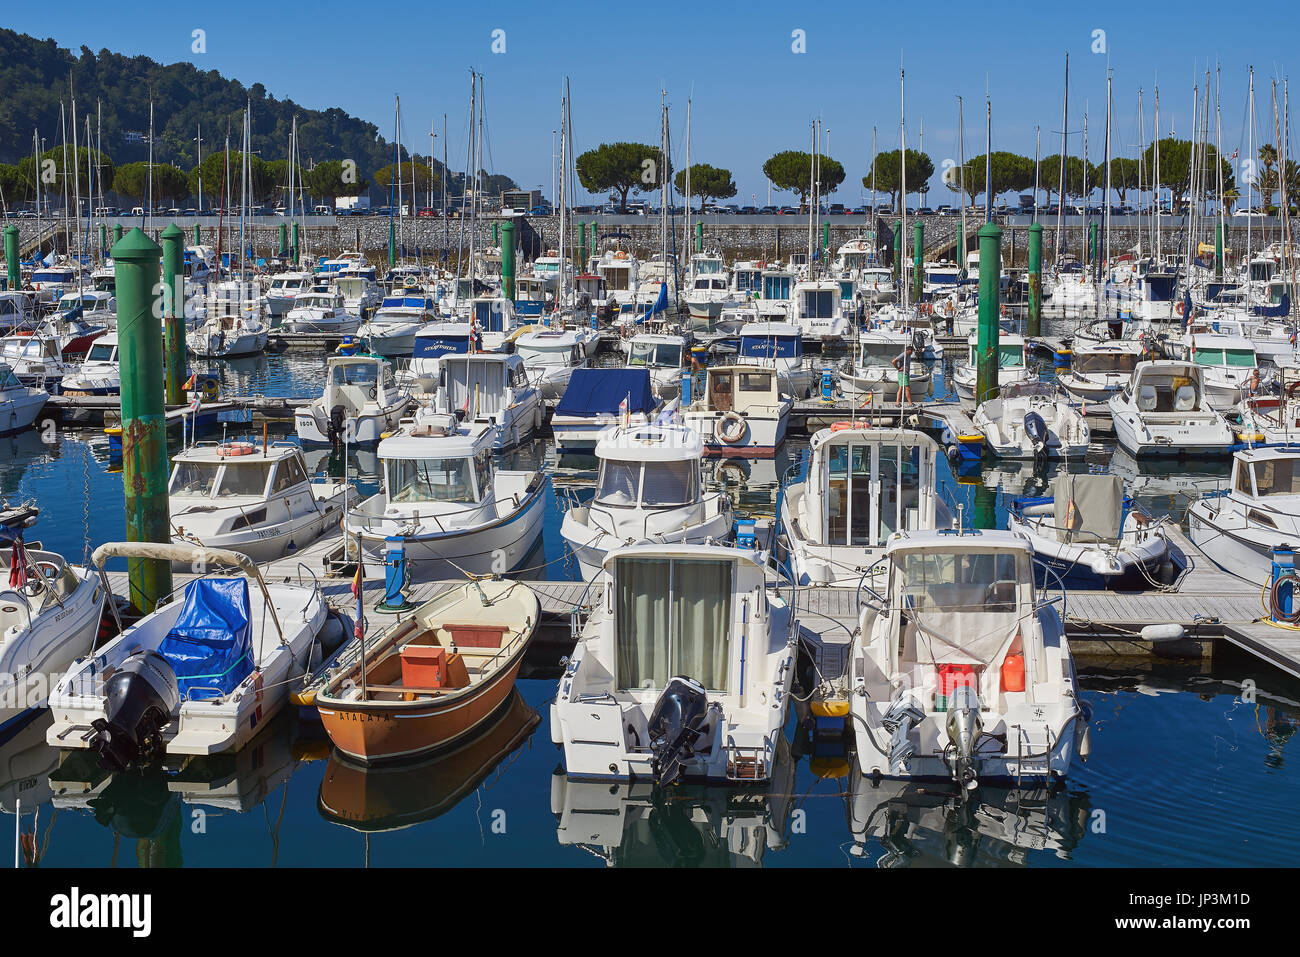 Hondarribia, Spain - July 16, 2017. Yachts moored in Marina port, the leisure harbour of Hondarribia (Fuenterrabia), in Gipuzkoa, Basque country, Spai Stock Photo